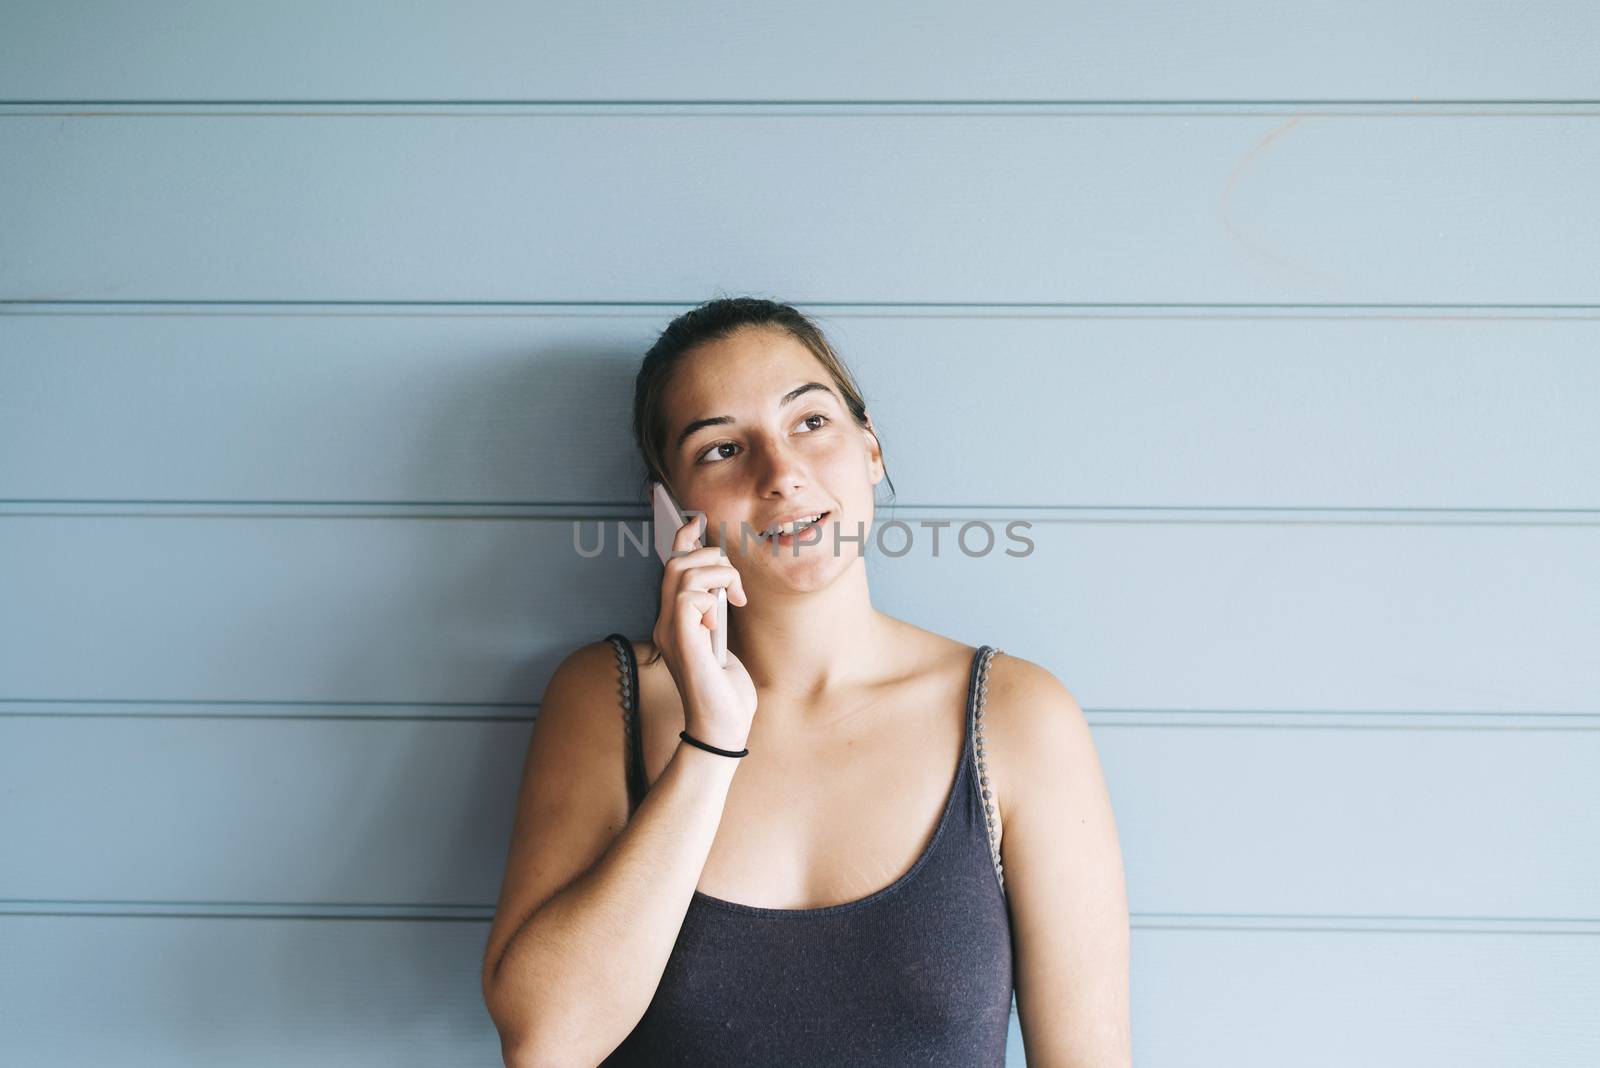 Attractive young adult female in summer dress talking on cell phone while leaning against wood paneled wall